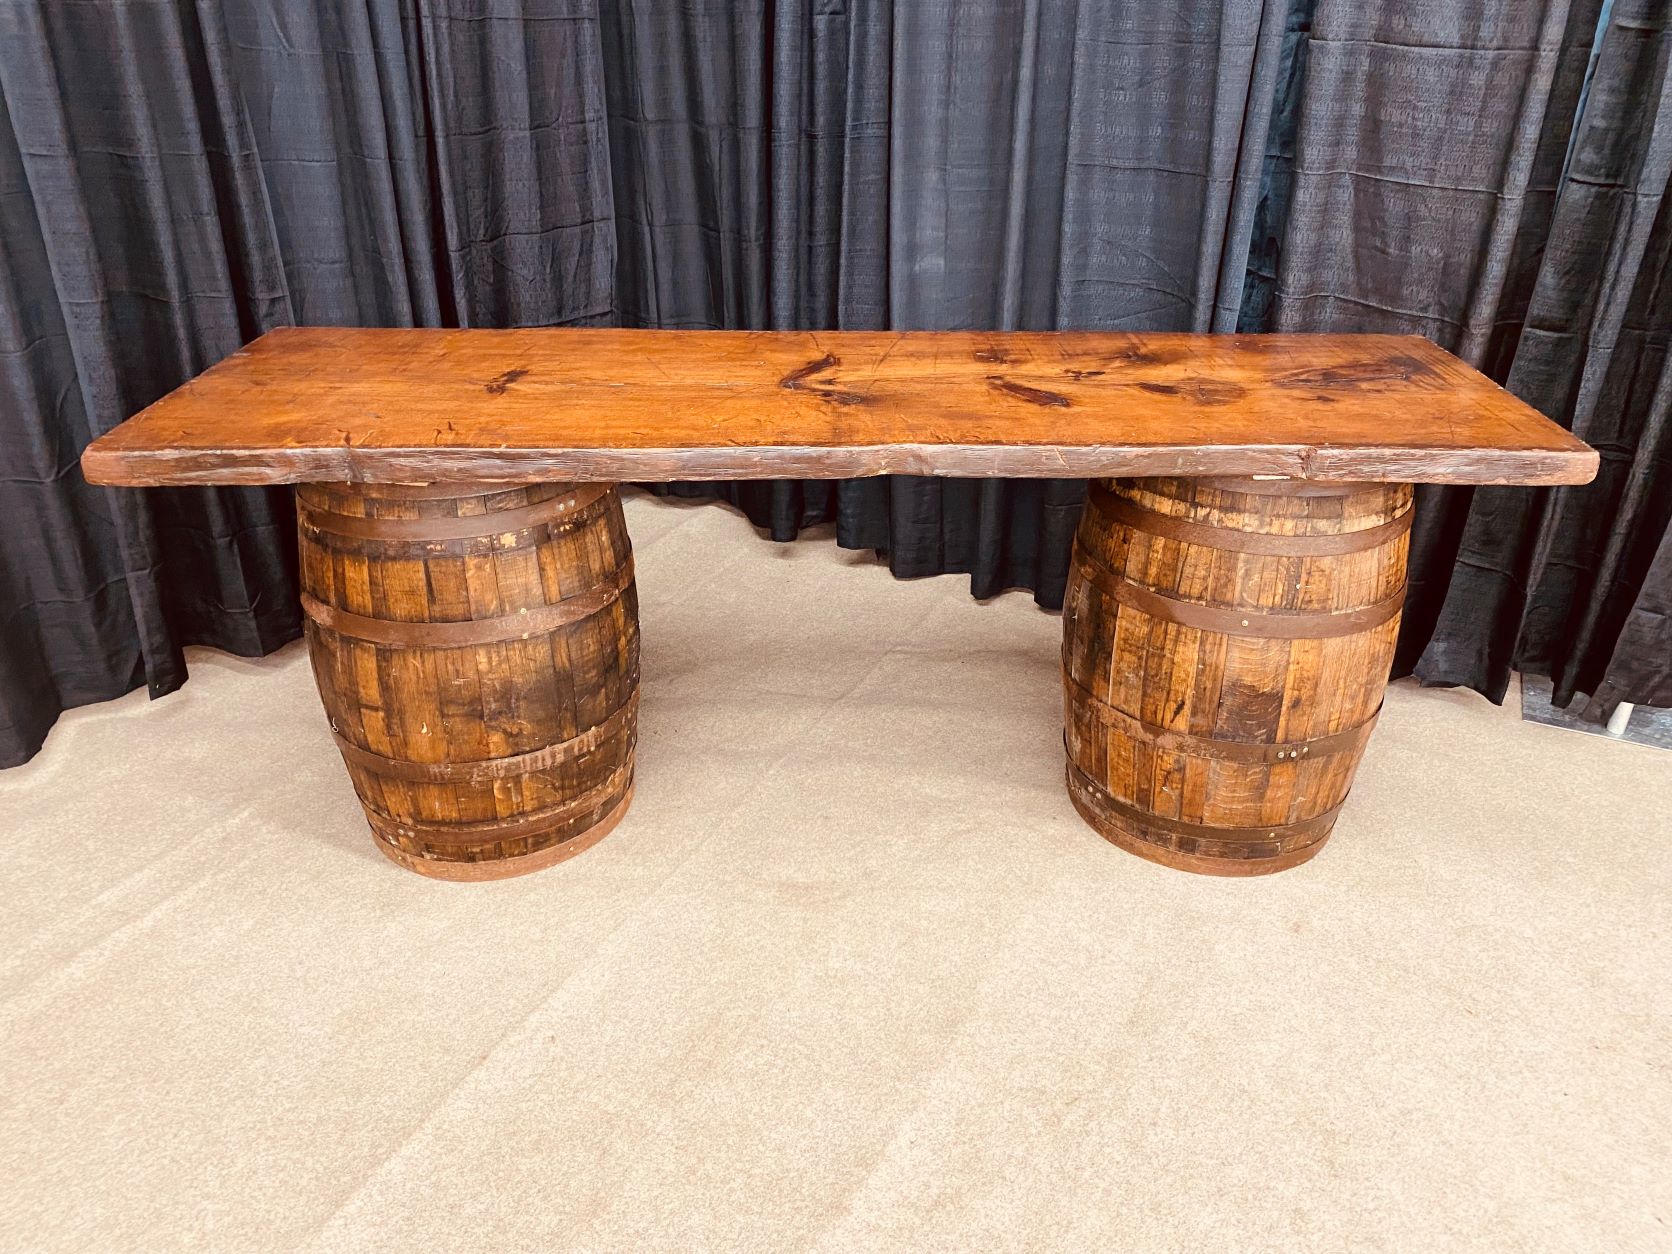 Whiskey Barrel Bar with Rustic Top